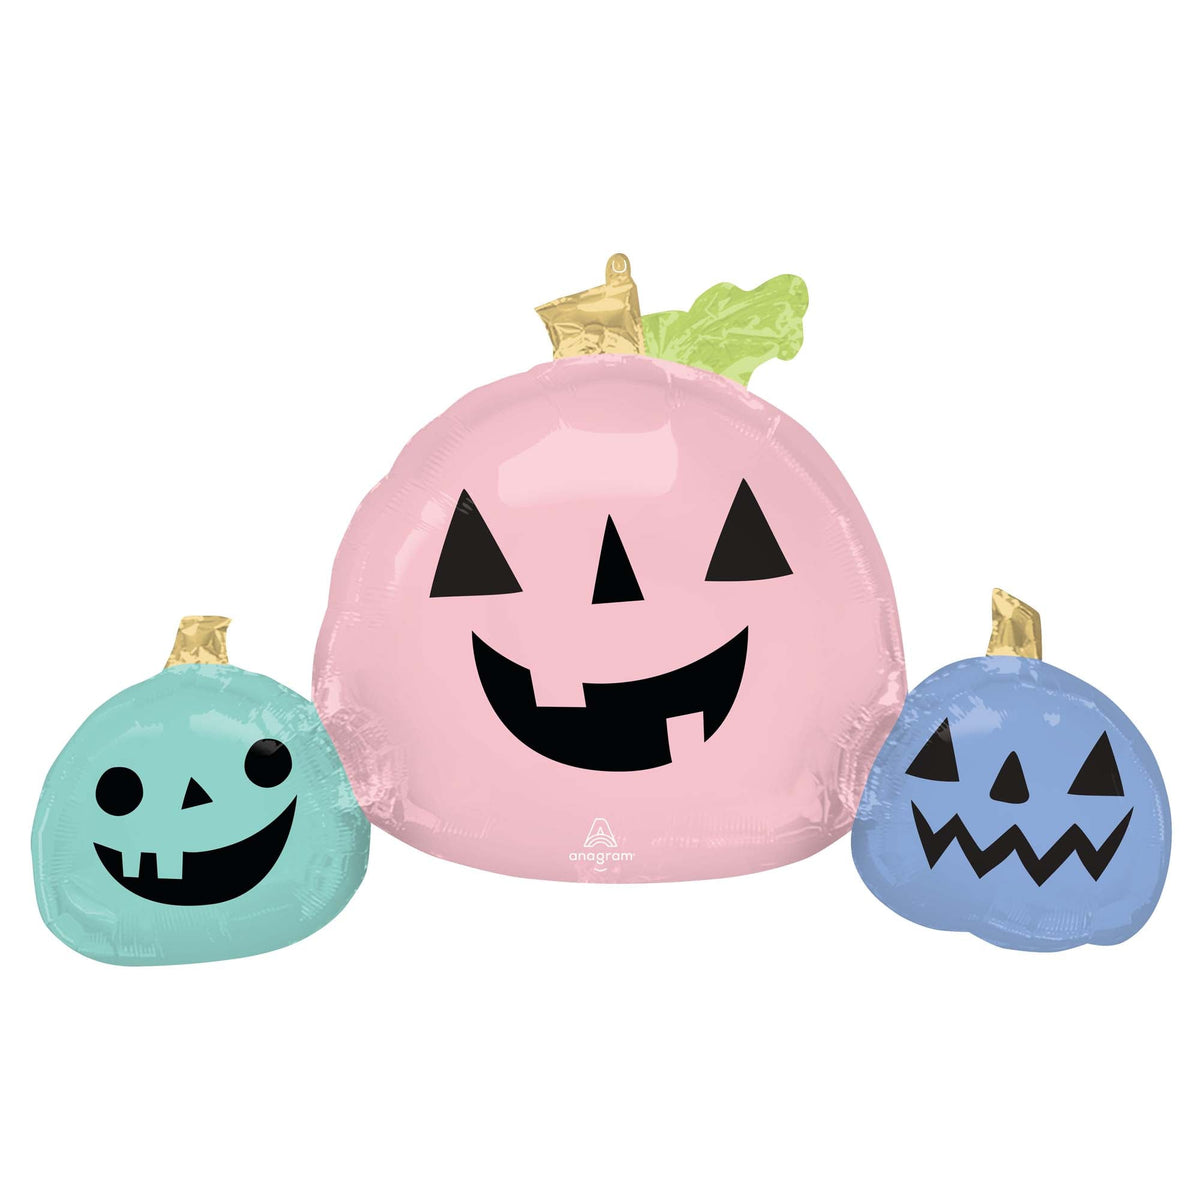 LE GROUPE BLC INTL INC Balloons Pastel Pumpkins Supershape Balloon, 35 Inches, 1 Count